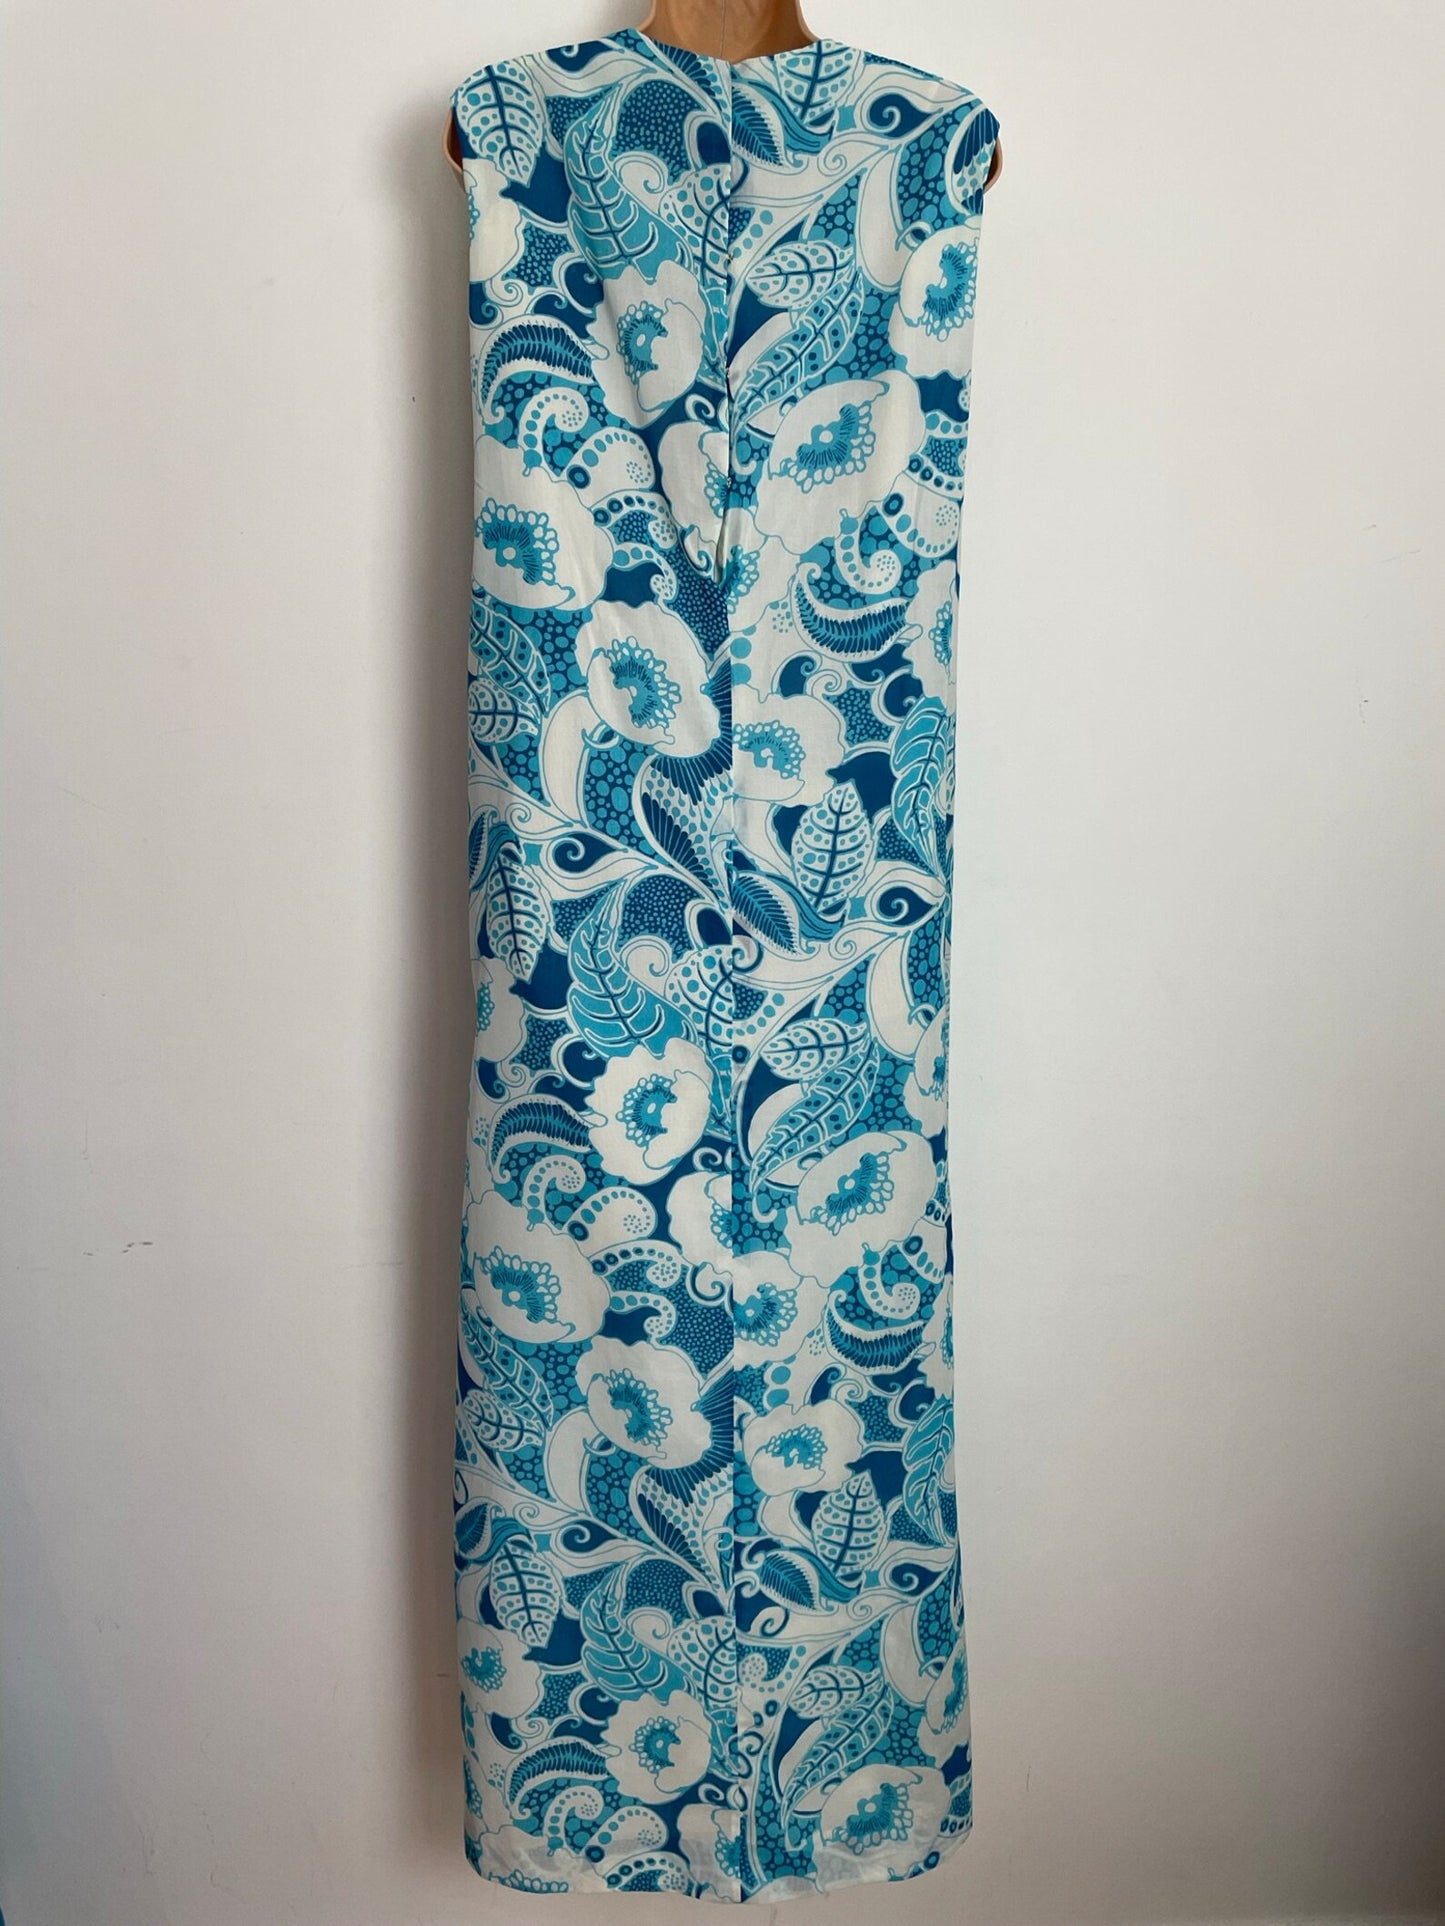 Vintage 1960s ULTRA RARE Couturier John Cavanagh Ready To Wear UK Size 16 White & Blue Floral Print Summer Boho Maxi Dress